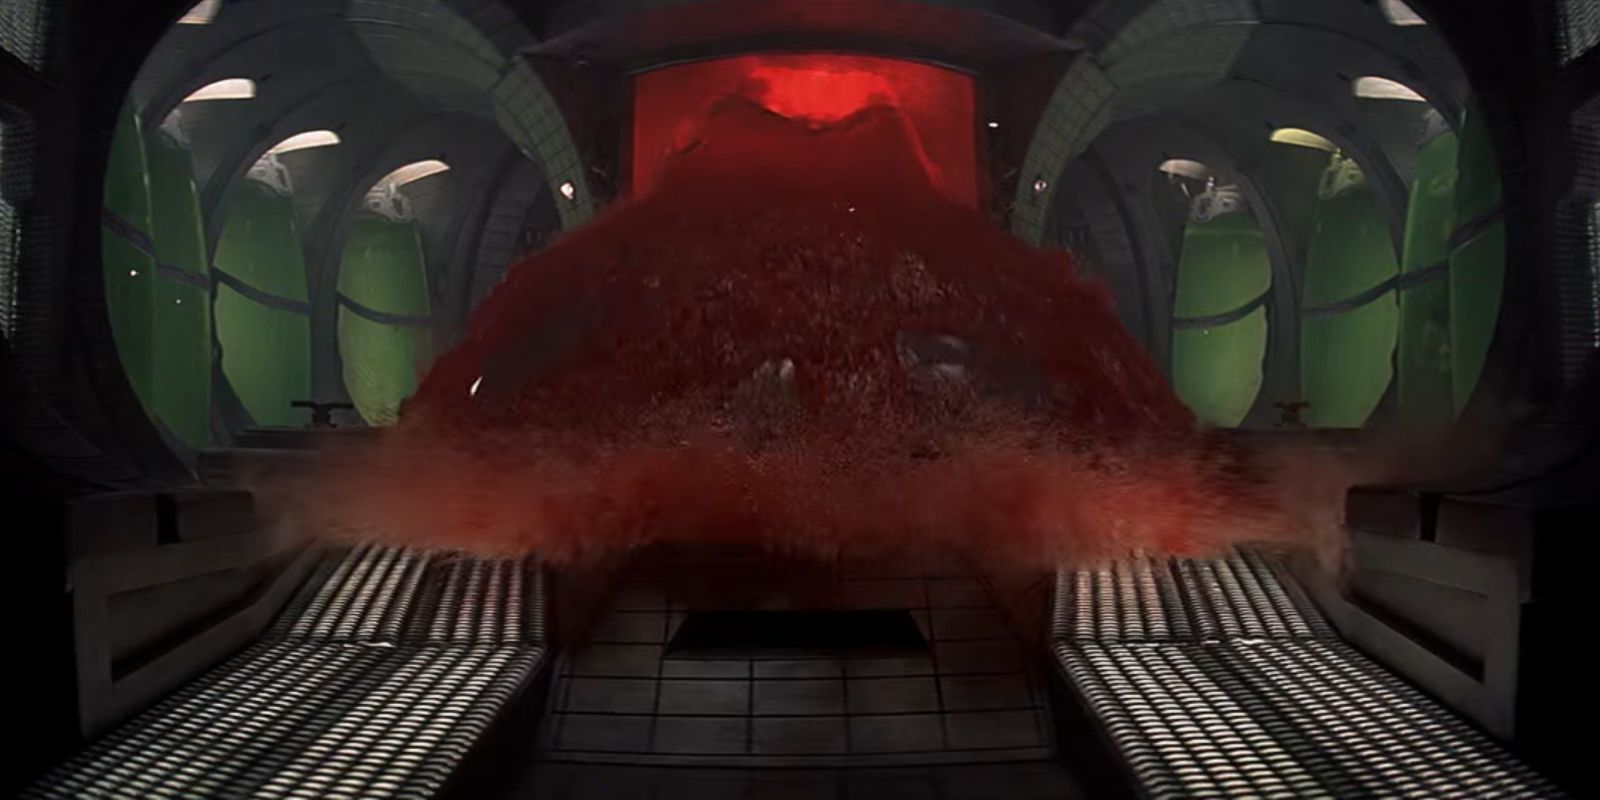 How Event Horizon Perfectly Combined Elements Of Alien & The Shining